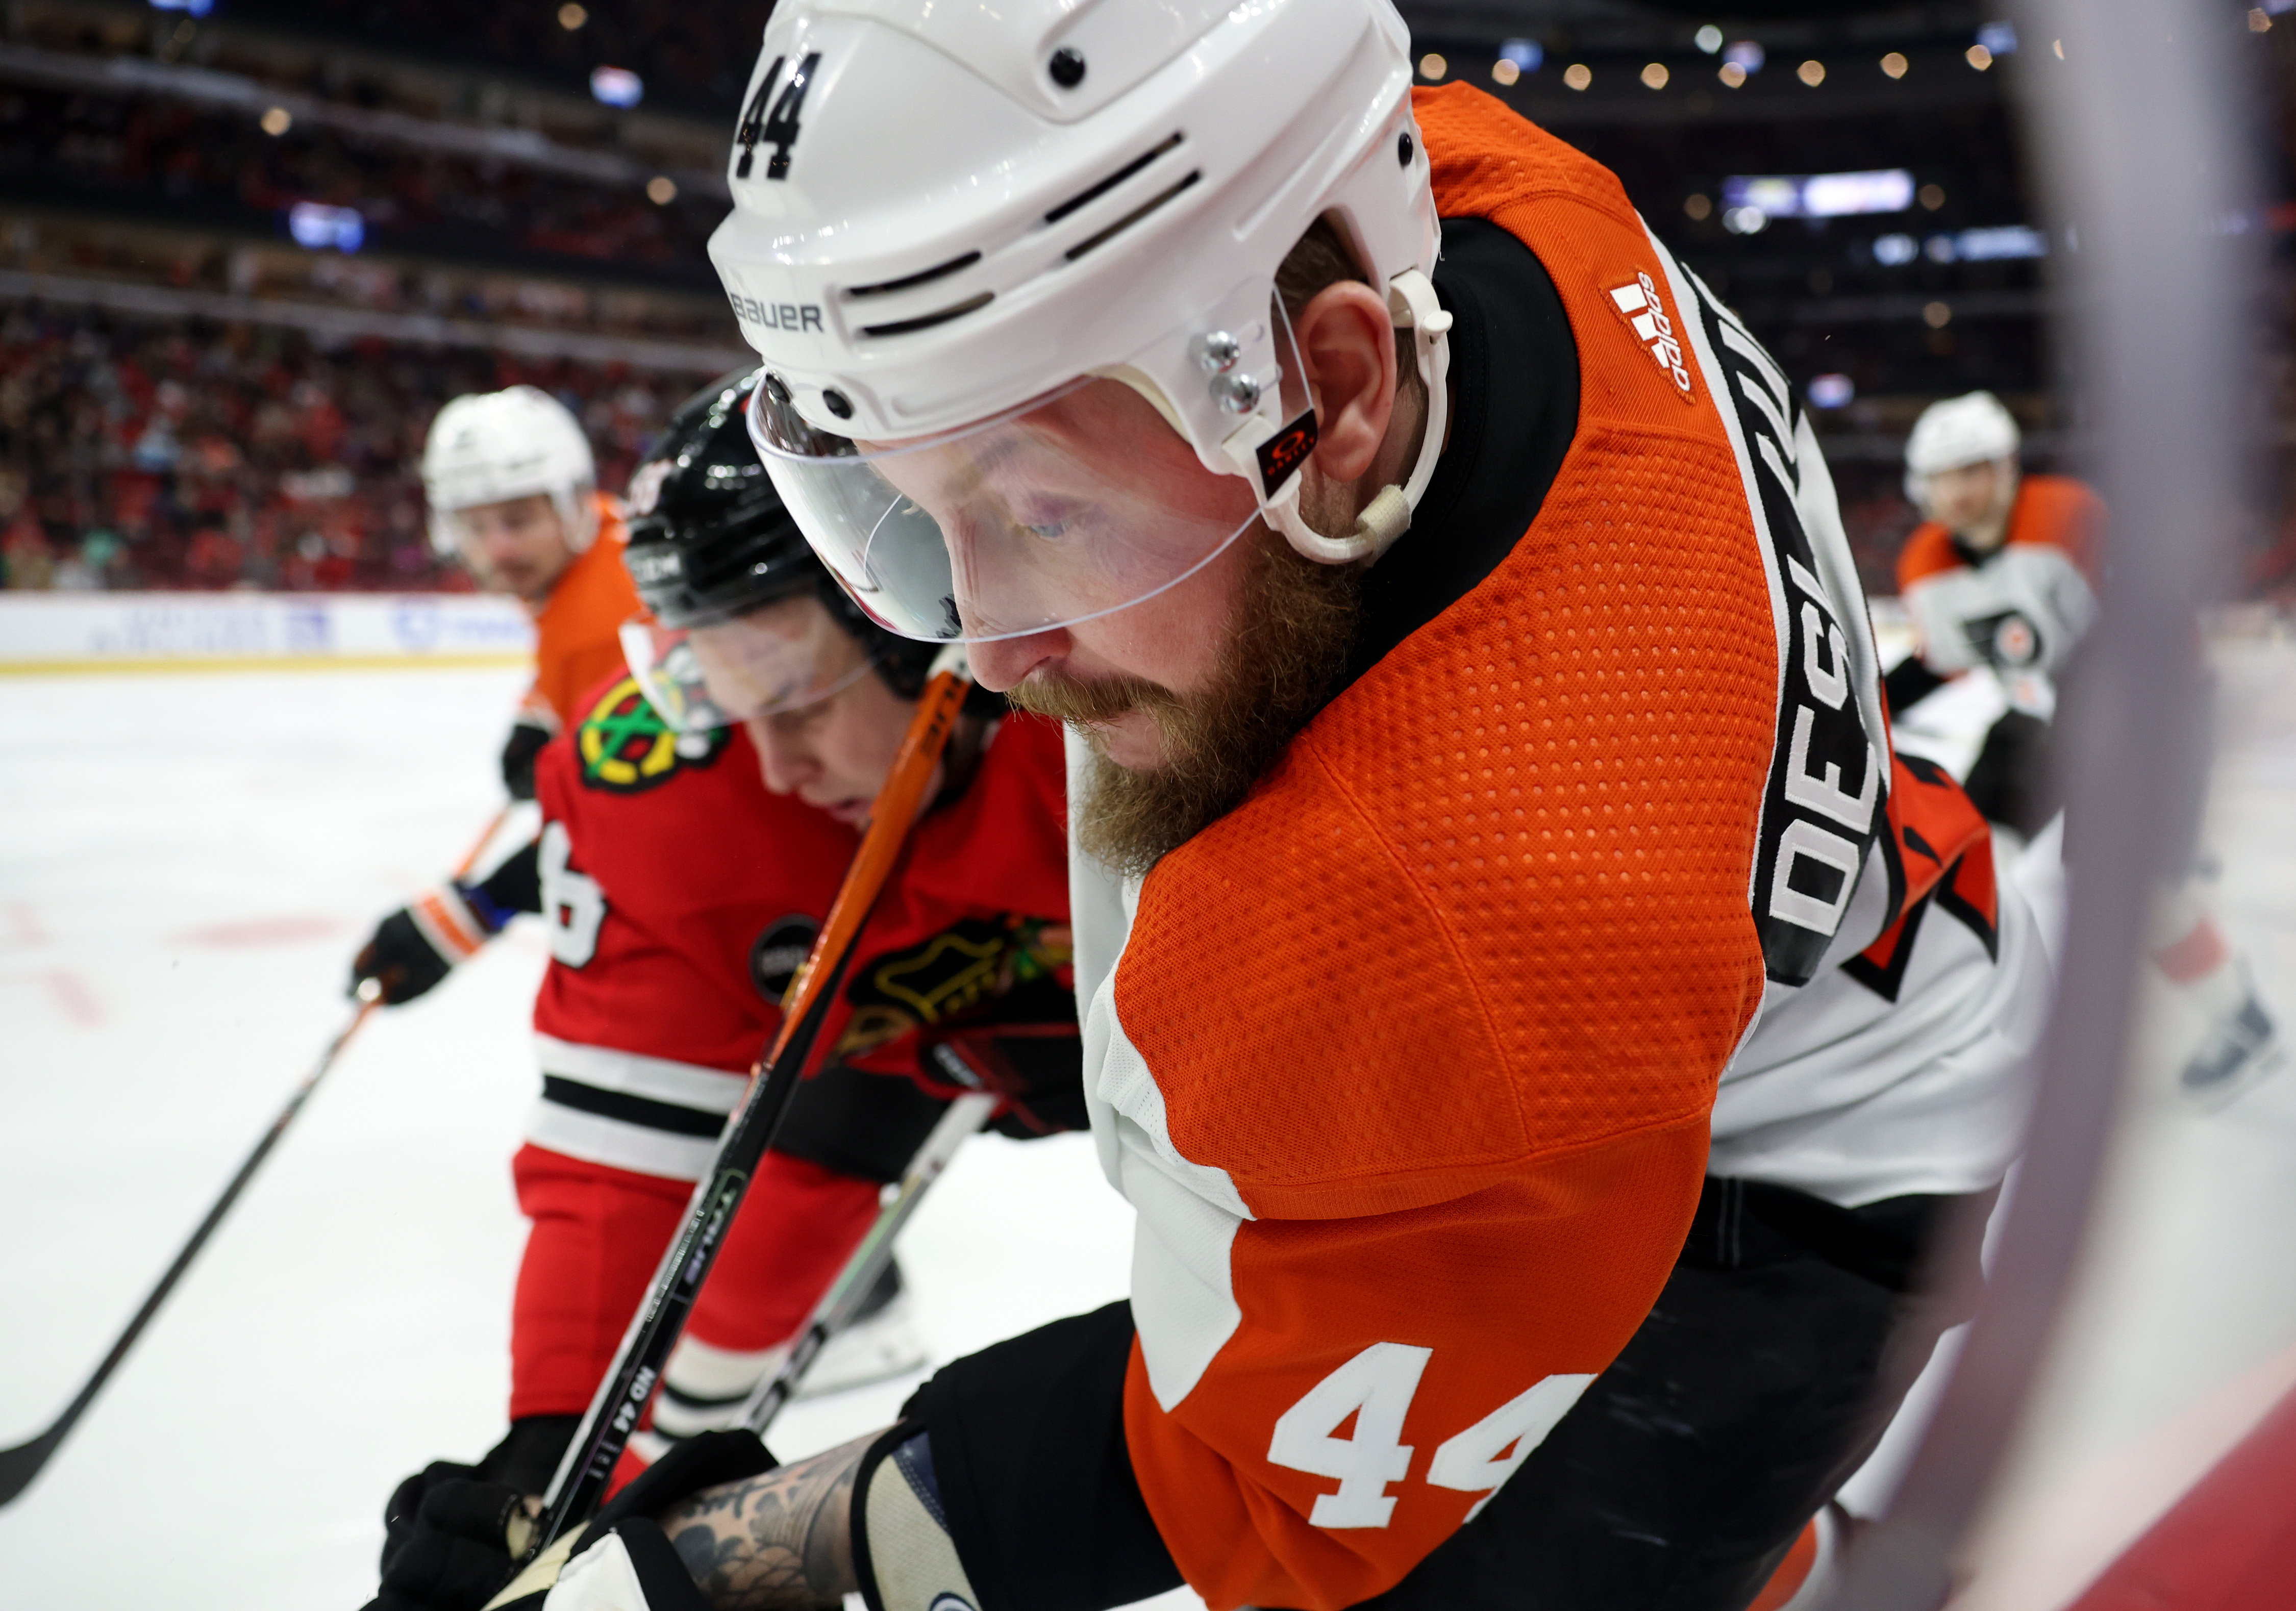 Flyers left wing Nicolas Deslauriers (44) and Blackhawks right wing MacKenzie Entwistle (58) make contact in the third period at the United Center in Chicago on February 21, 2024.  (John J. Kim/Chicago Tribune)